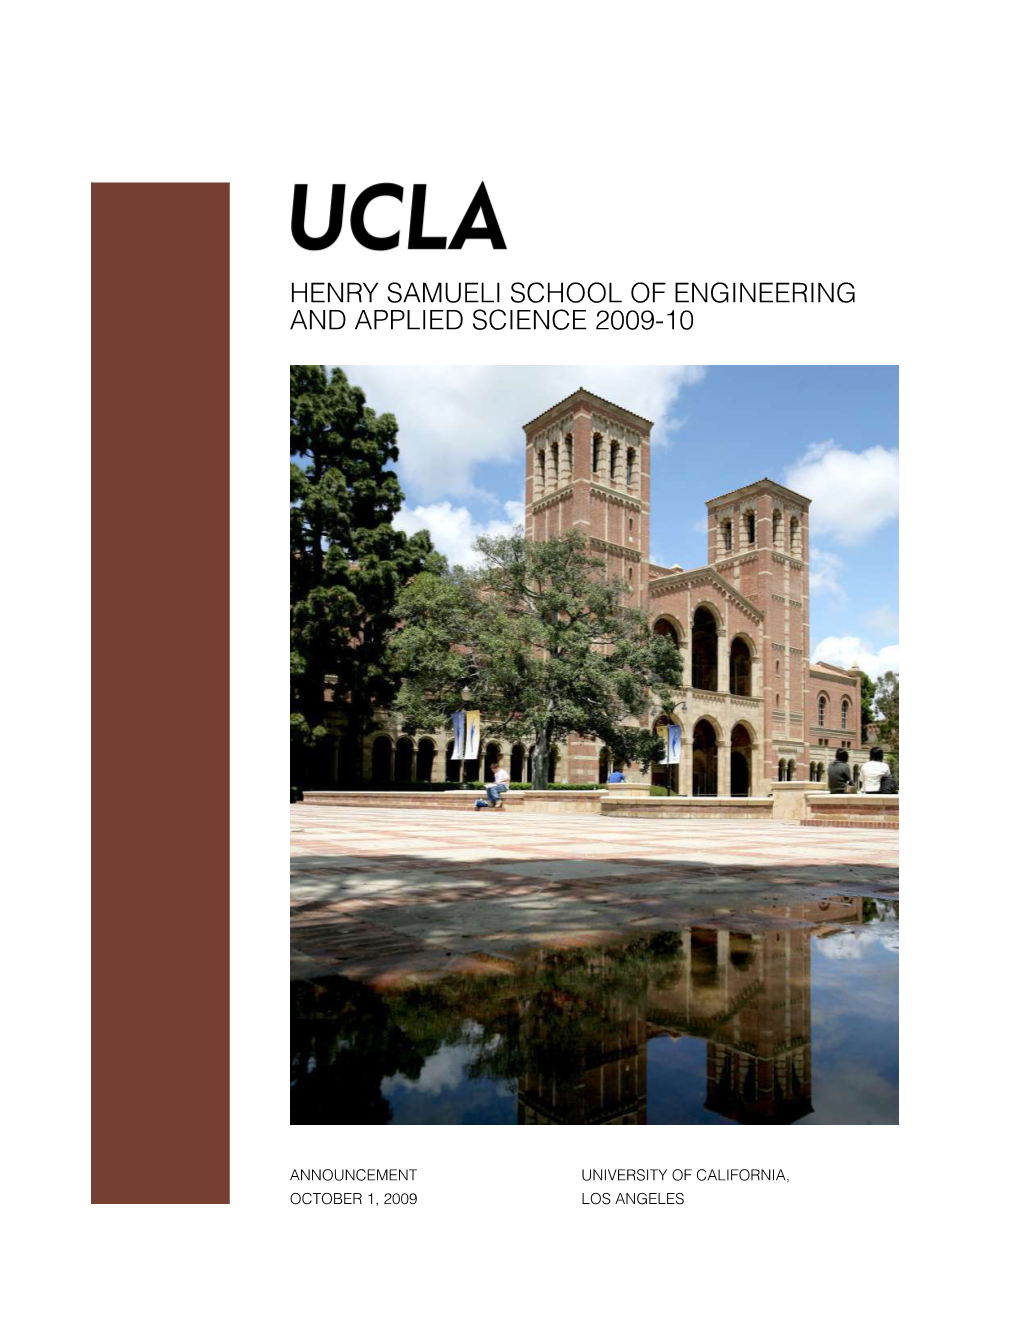 UCLA Henry Samueli School of Engineering and Applied Science Announcement 2009-10